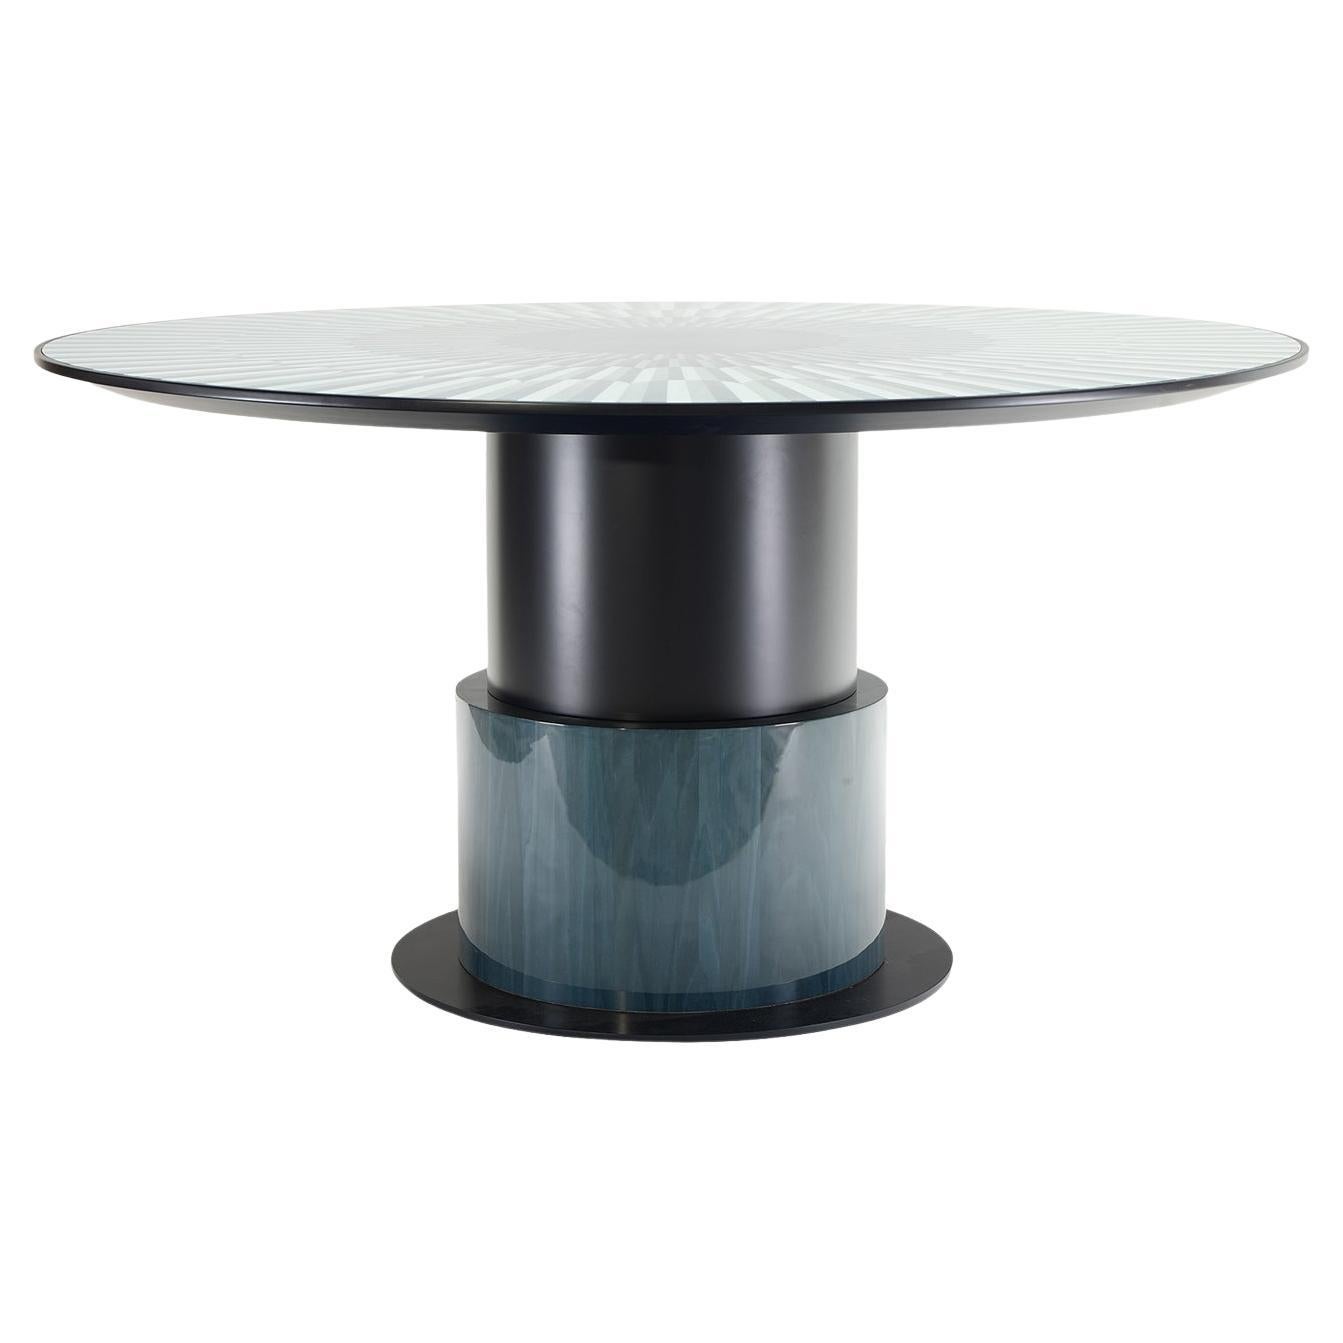 Cafedesart Dining Room Tables